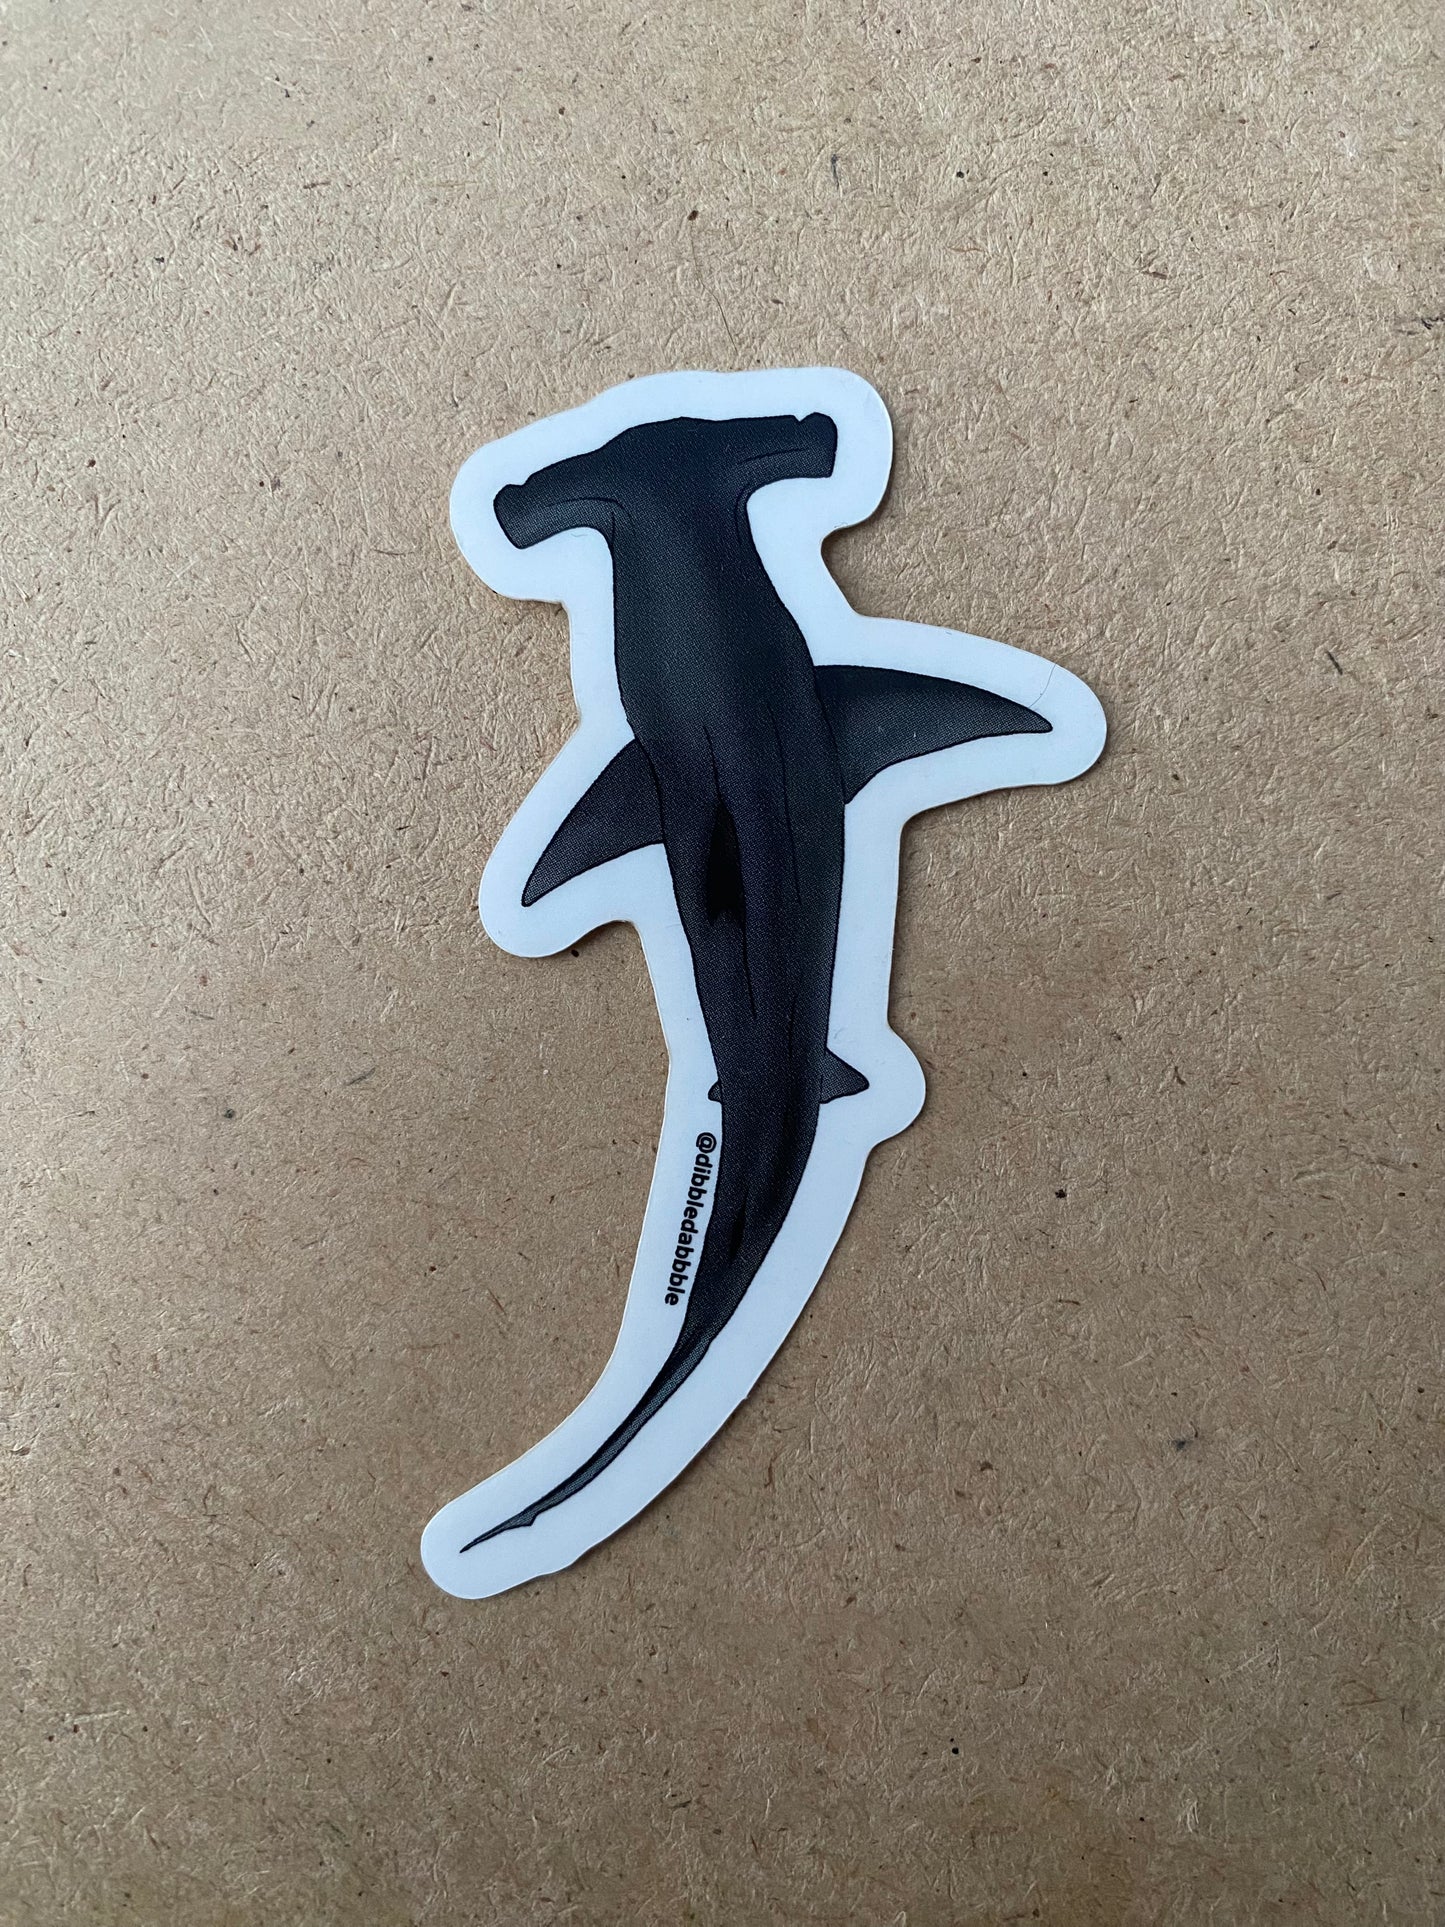 Stickers | Sharks and Whales